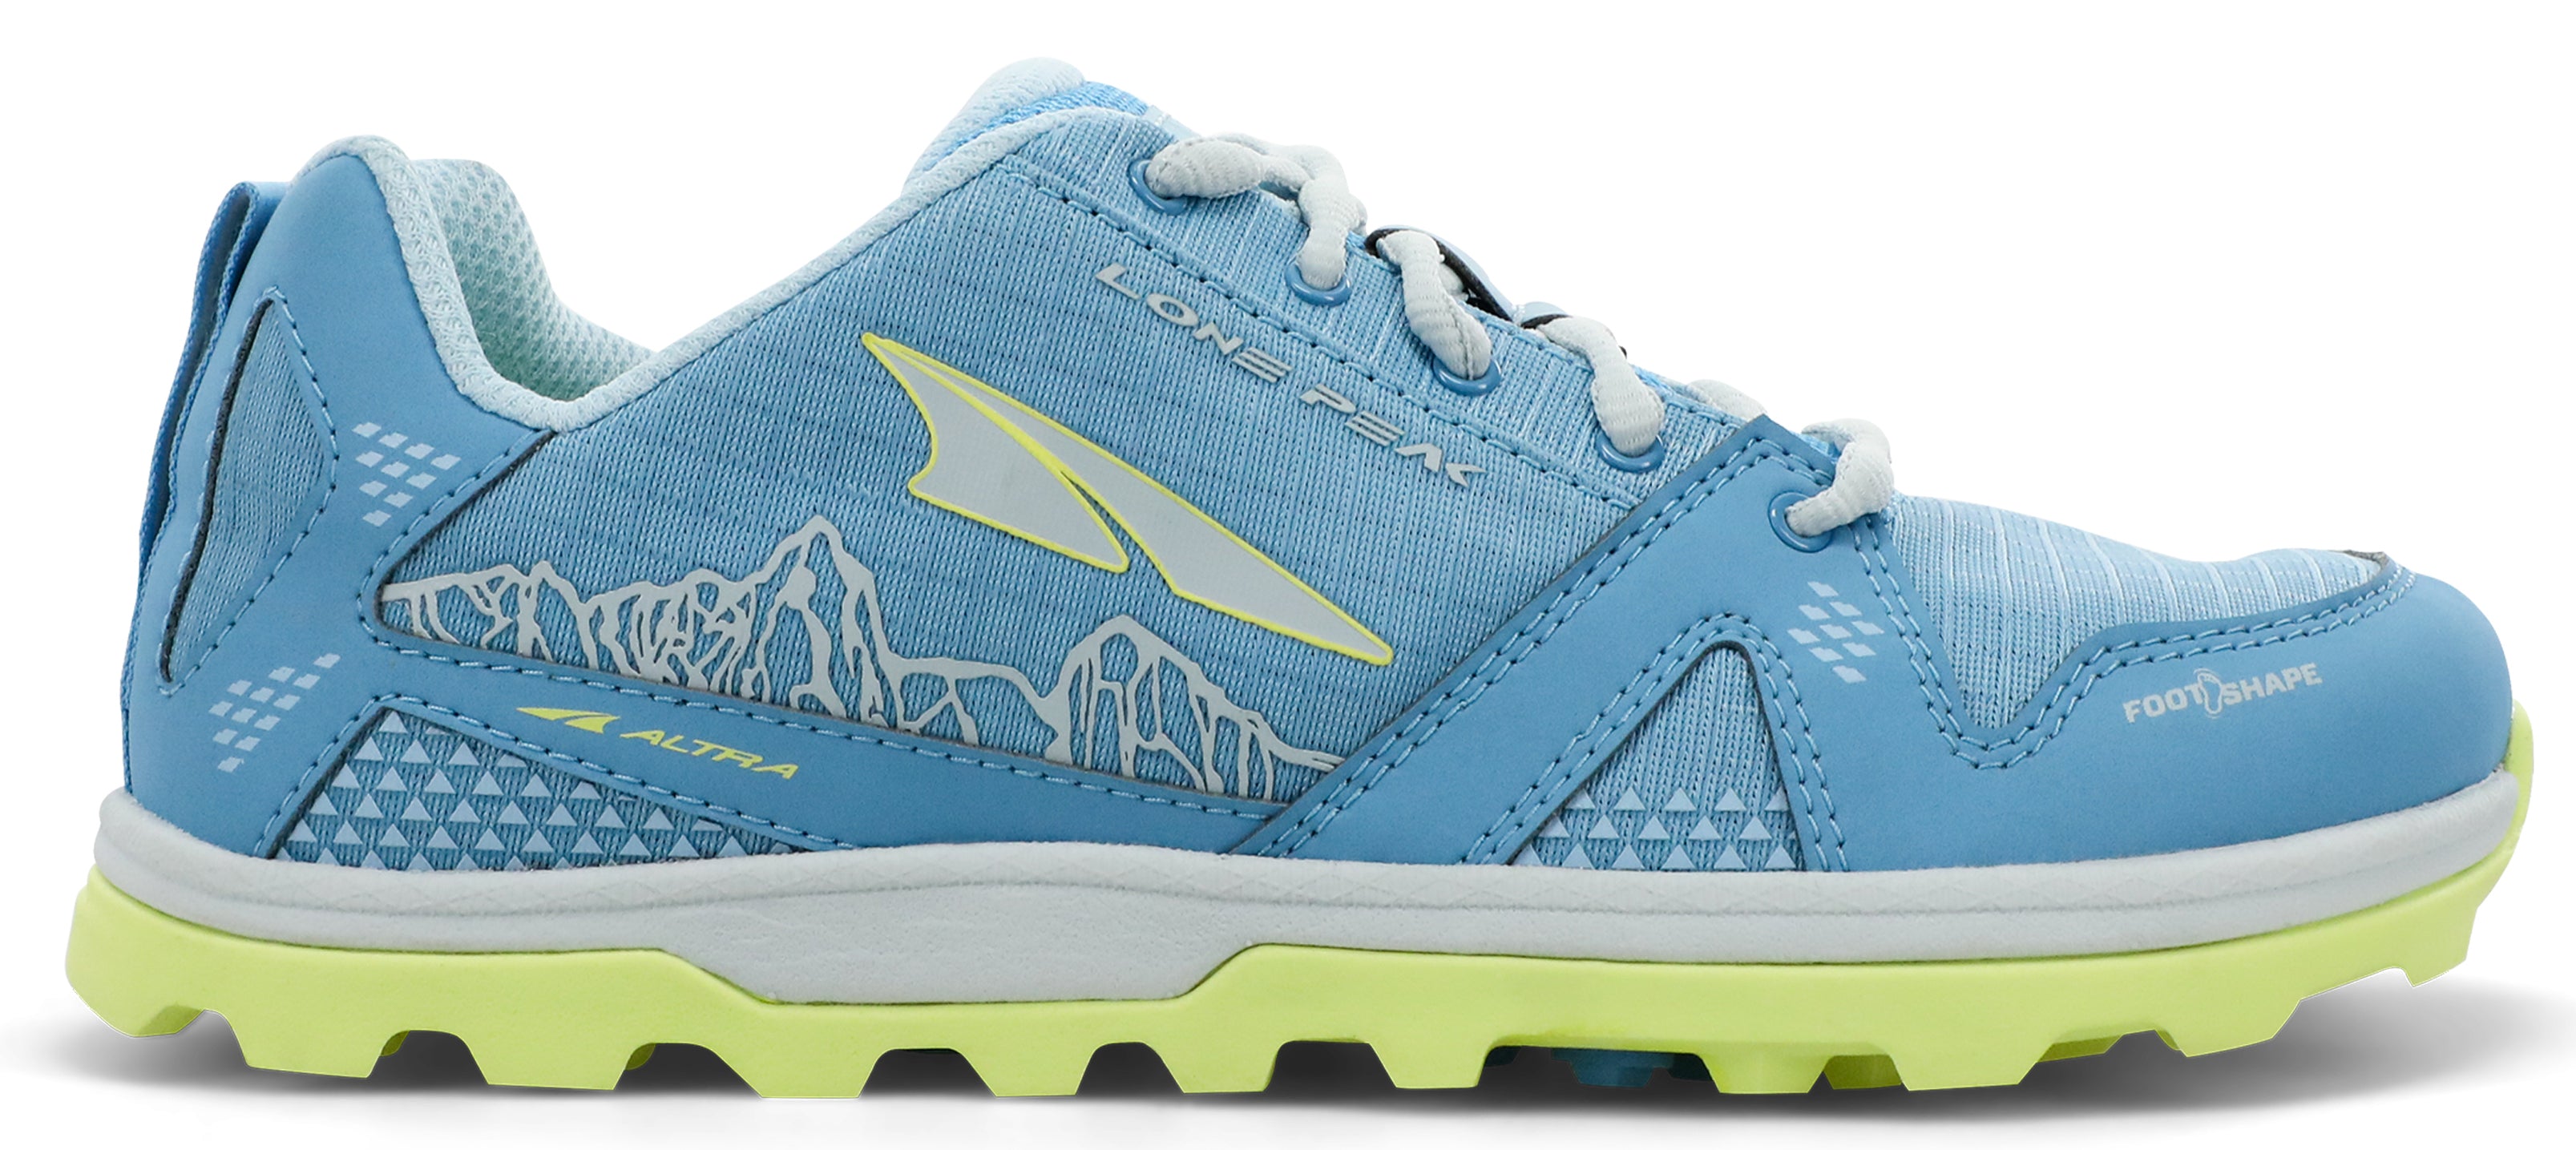 Altra Kid's Youth Lone Peak Trail Running Shoe in Light Blue from the side